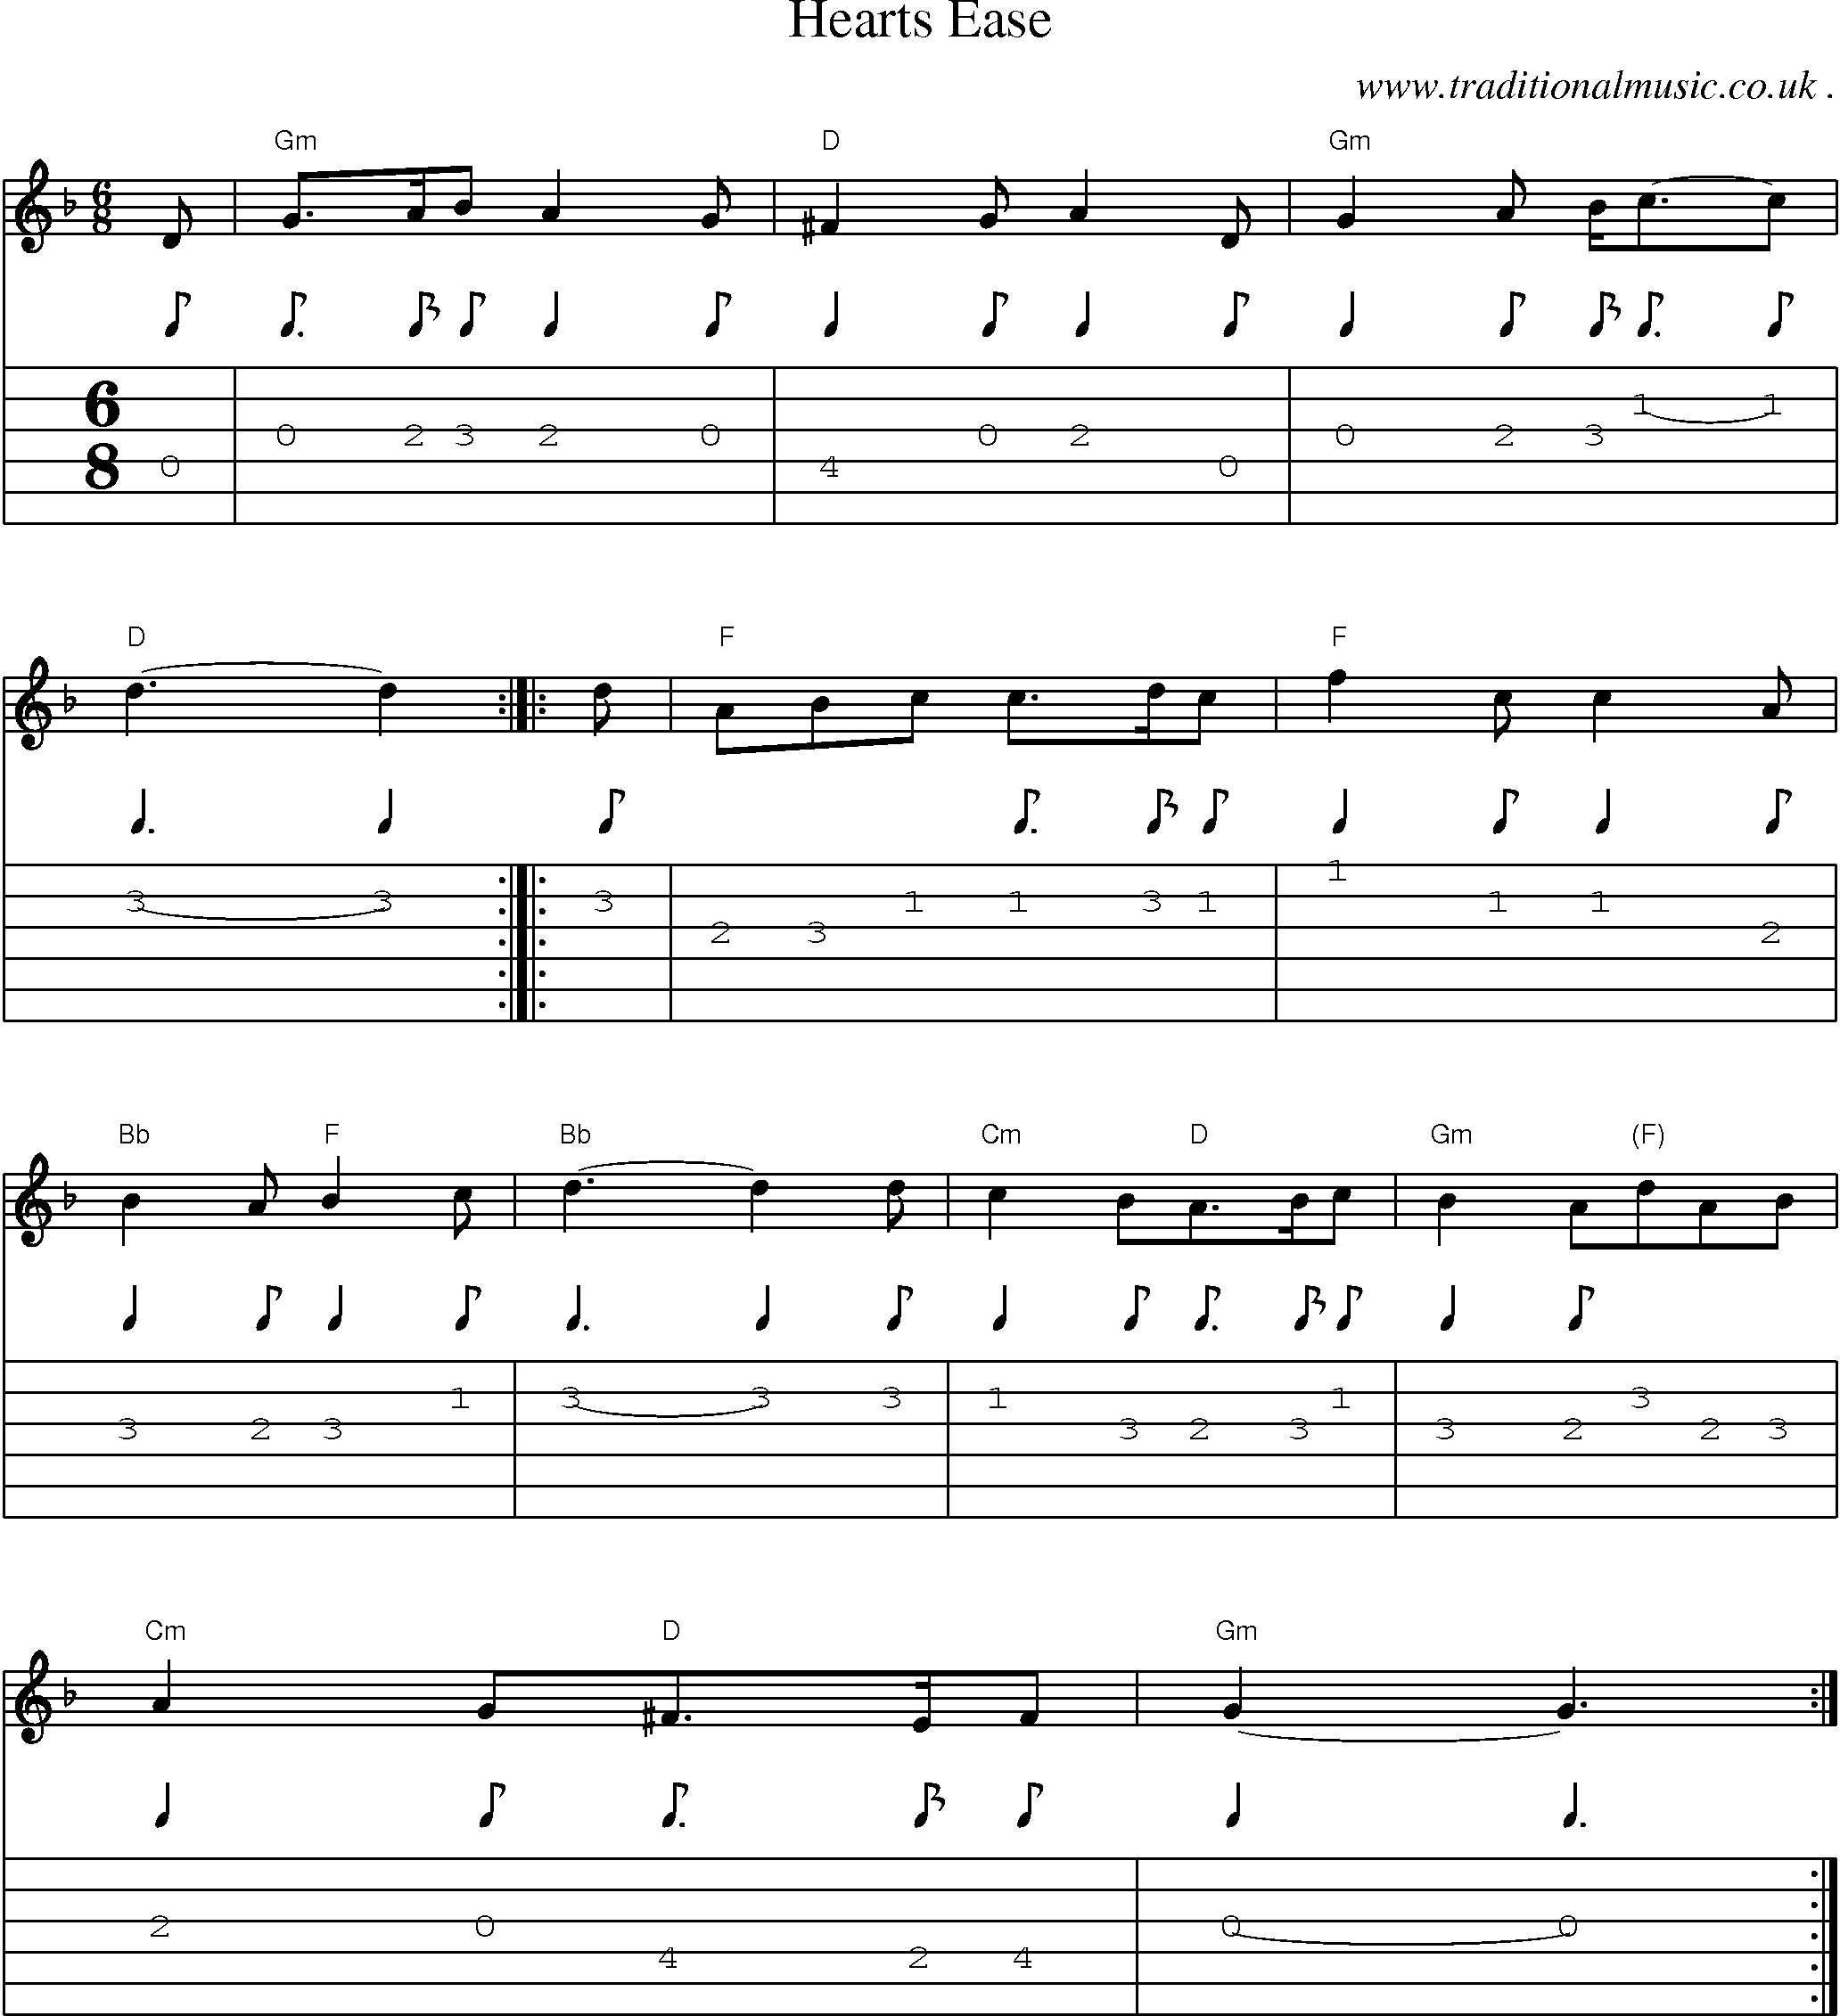 Sheet-Music and Guitar Tabs for Hearts Ease